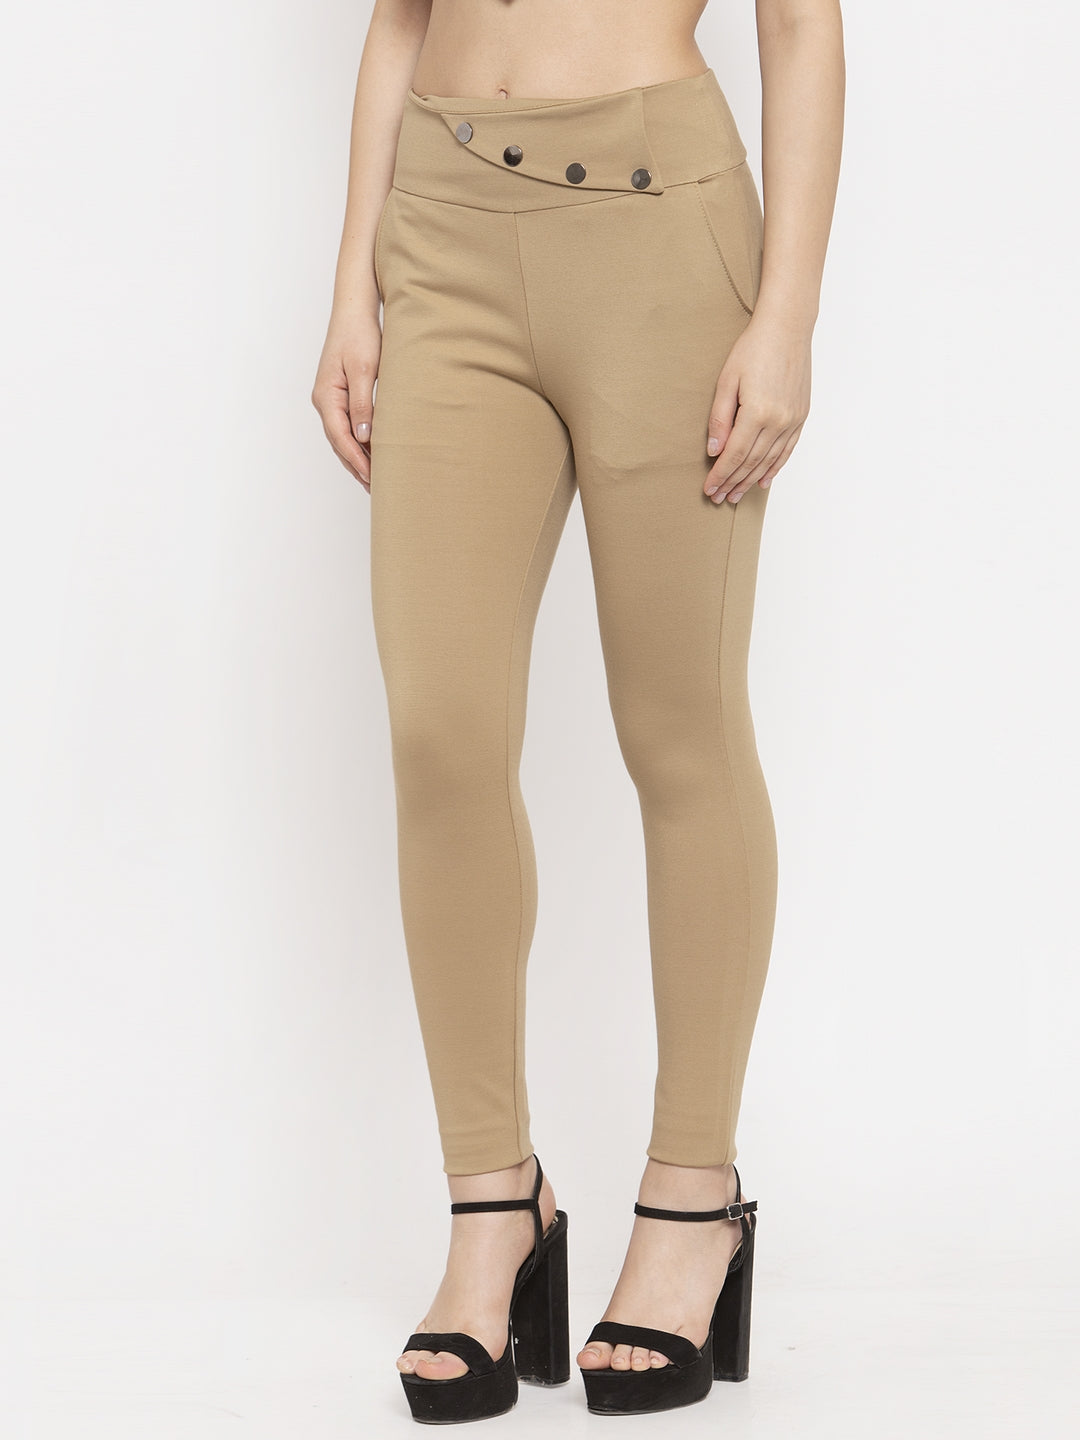 Clora Fawn Relaxed Fit Jeggings